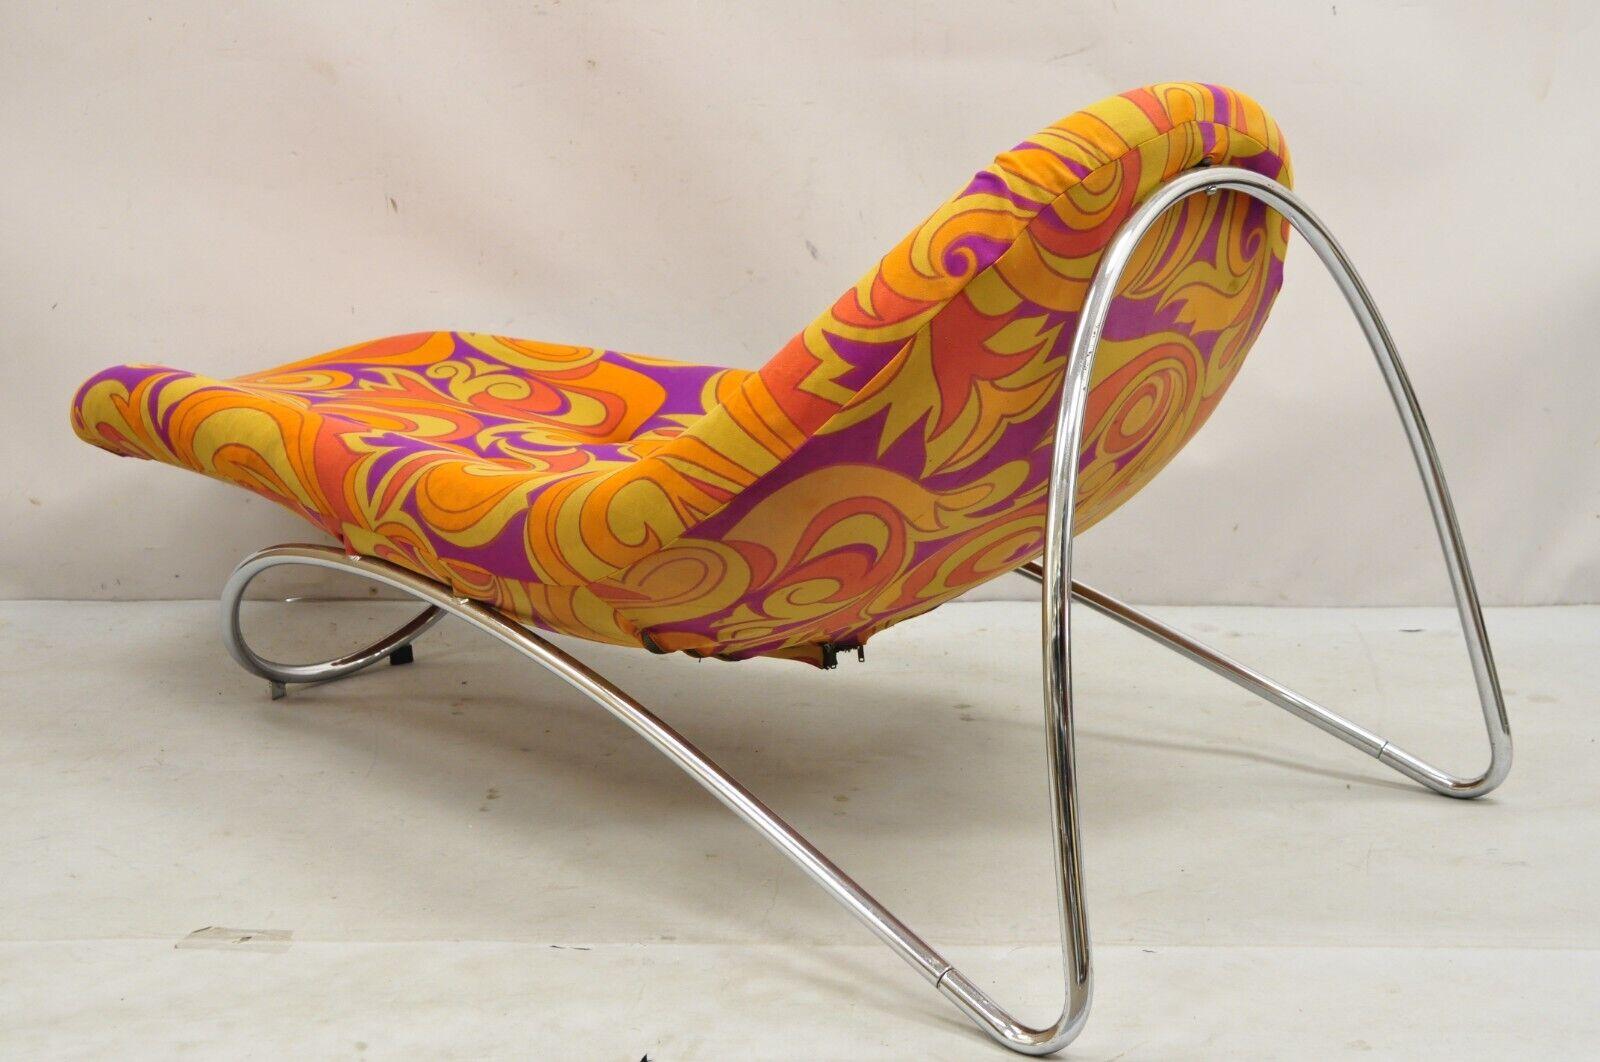 Vintage Mid Century Modern Pierre Paulin Style Groovy Wave Chrome Chaise Lounge In Good Condition For Sale In Philadelphia, PA